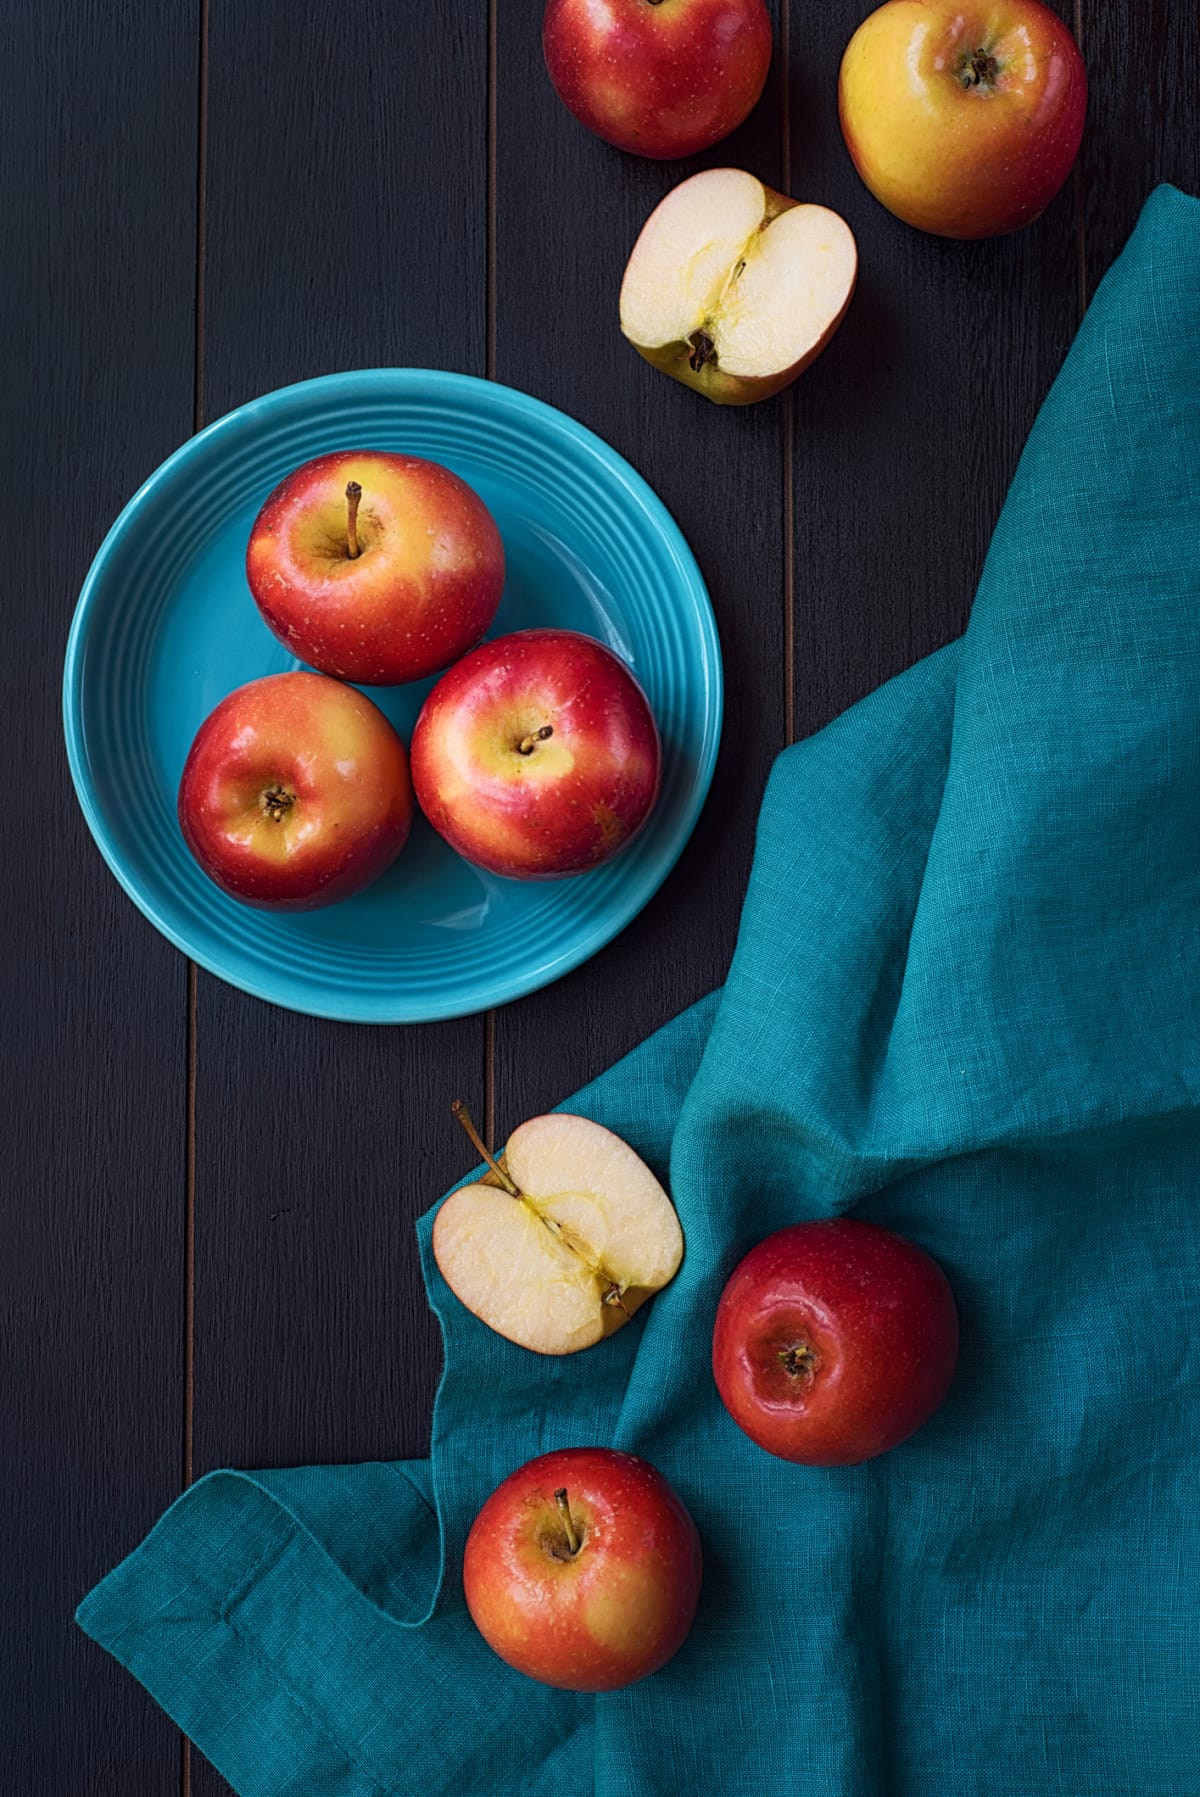 The Absolute Best Way To Keep Apples Fresh